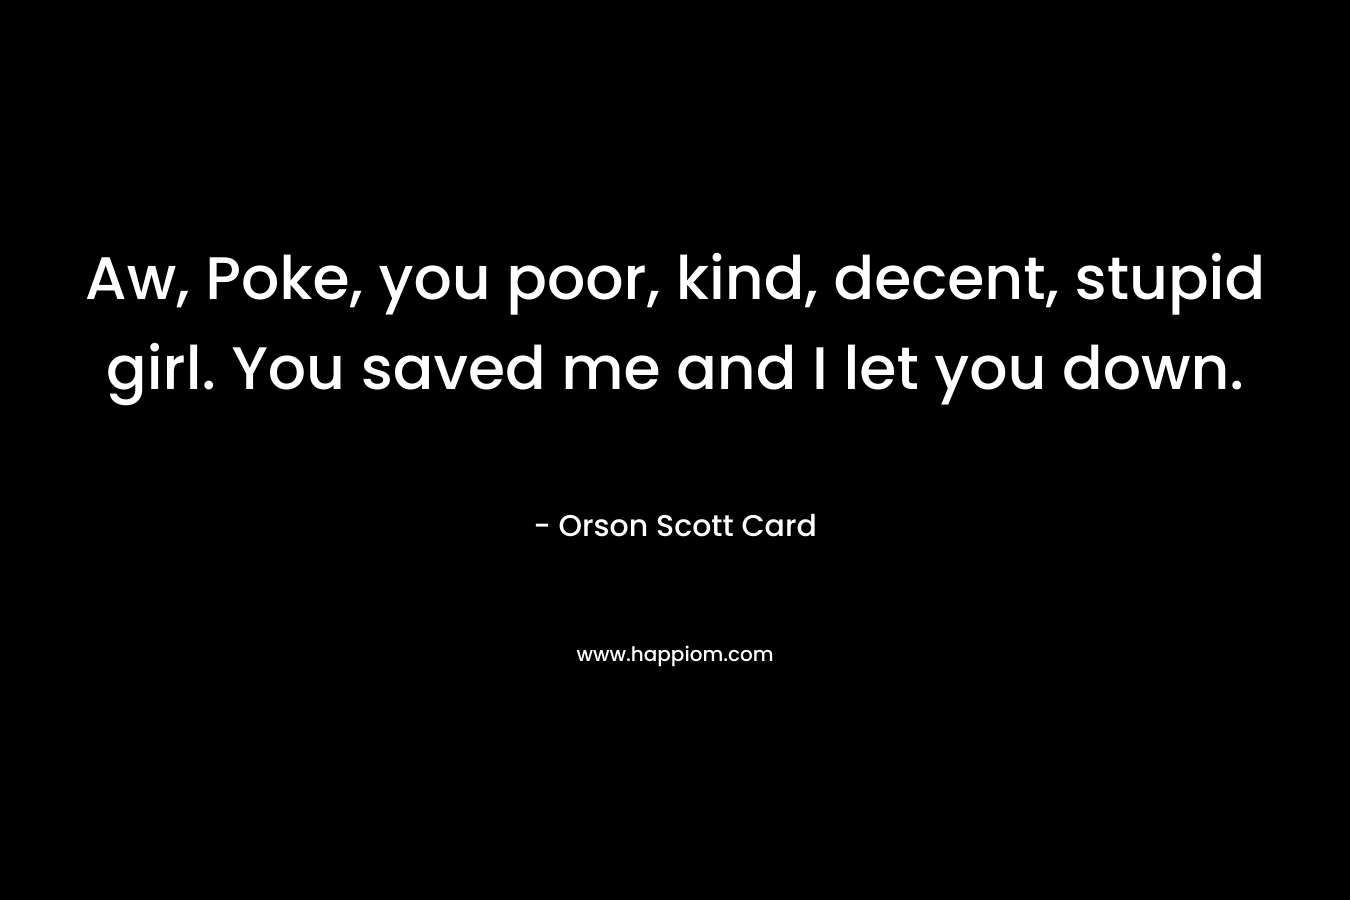 Aw, Poke, you poor, kind, decent, stupid girl. You saved me and I let you down. – Orson Scott Card